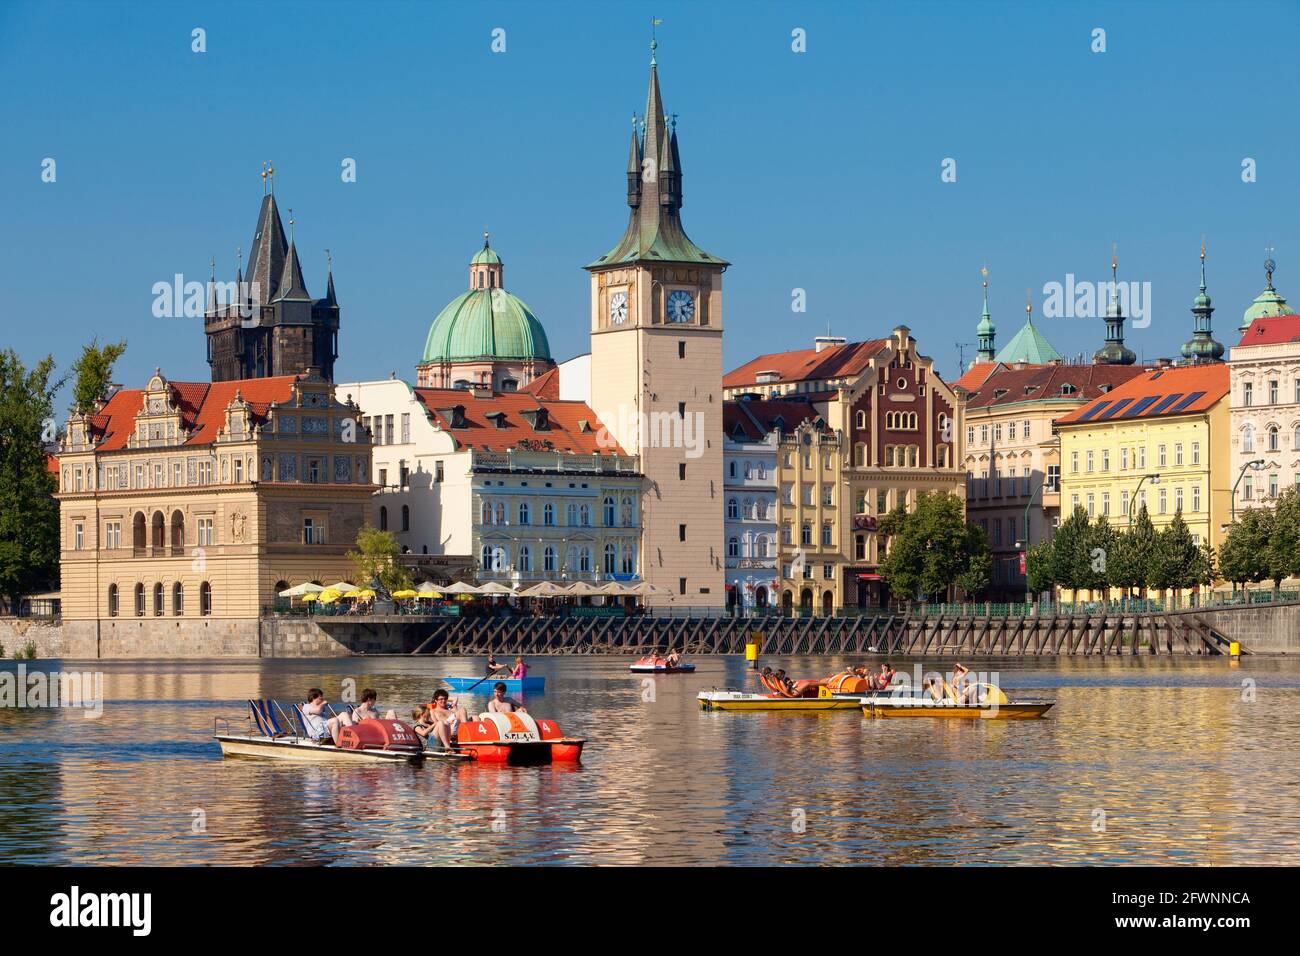 prague - novotneho lavka, smetanovo museum, towers of the old town and boats Stock Photo